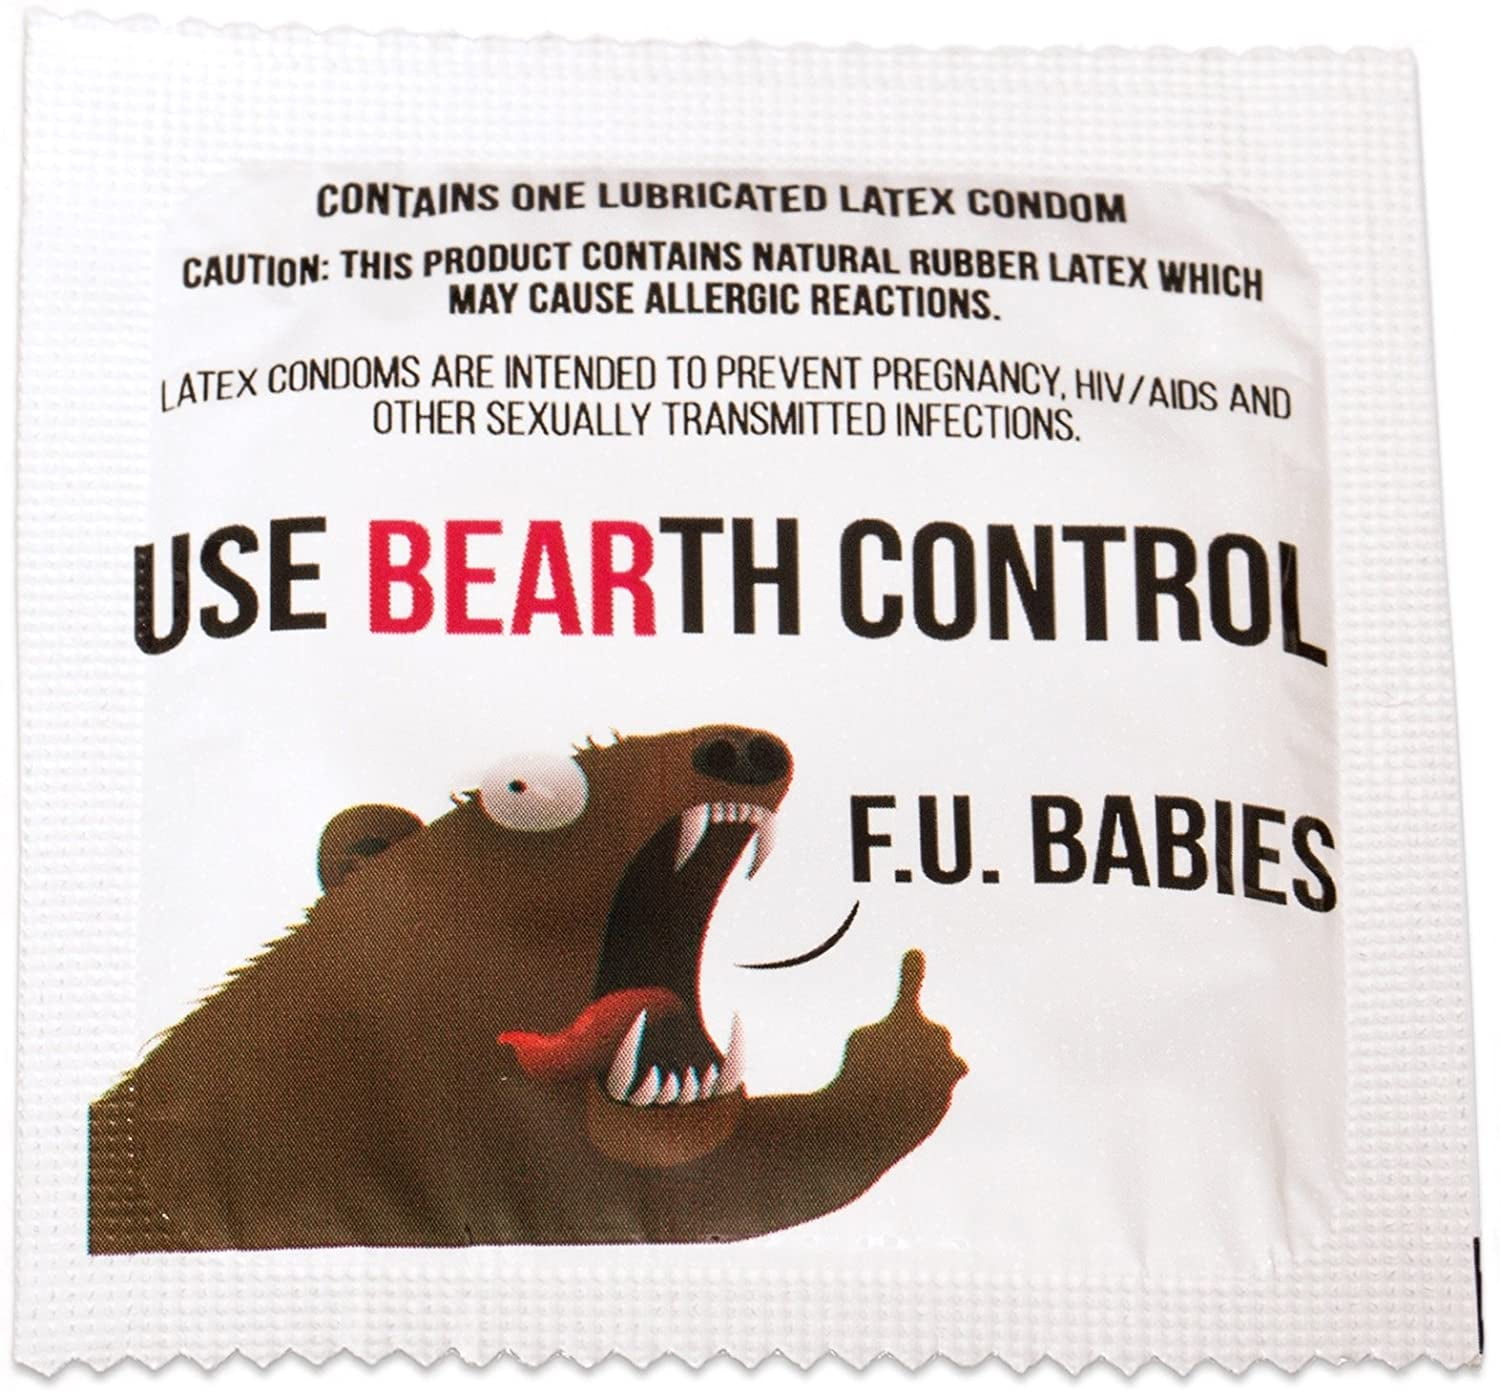 Bears vs Babies Board Game Expansion Pack NSFW Adult Card Game Friends Fun 18+ 